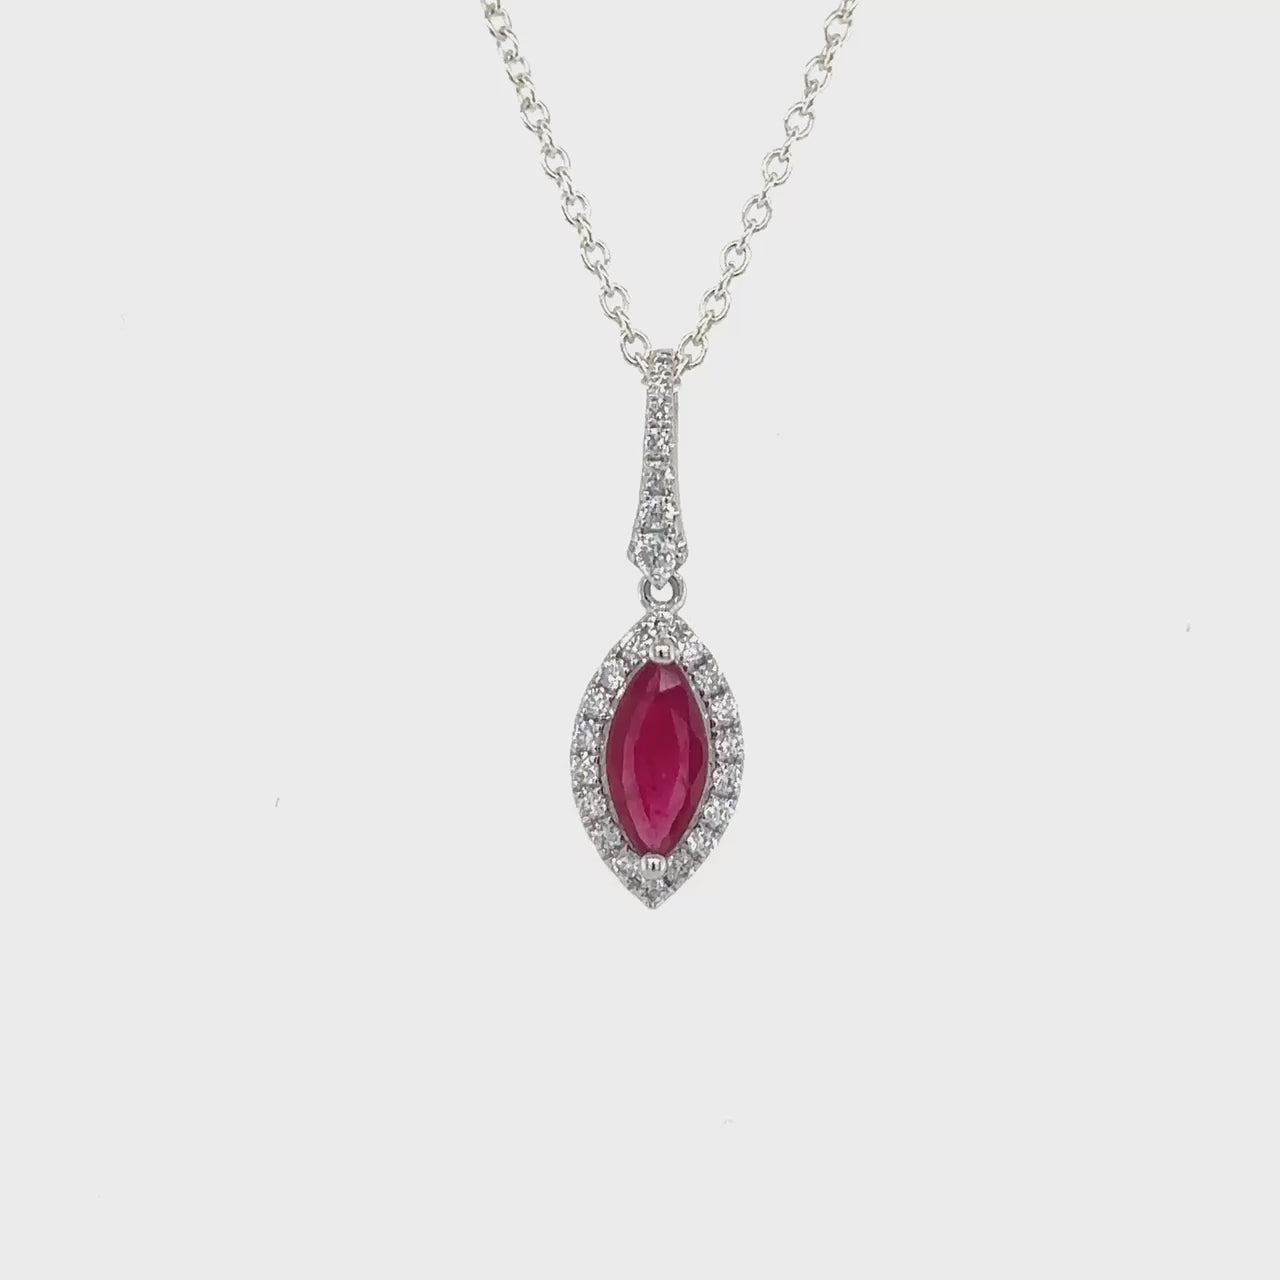  a stunning marquise-cut ruby surrounded by a sparkling halo of diamonds. This exquisite piece exudes elegance and sophistication, perfect for adding a touch of glamour to any ensemble.